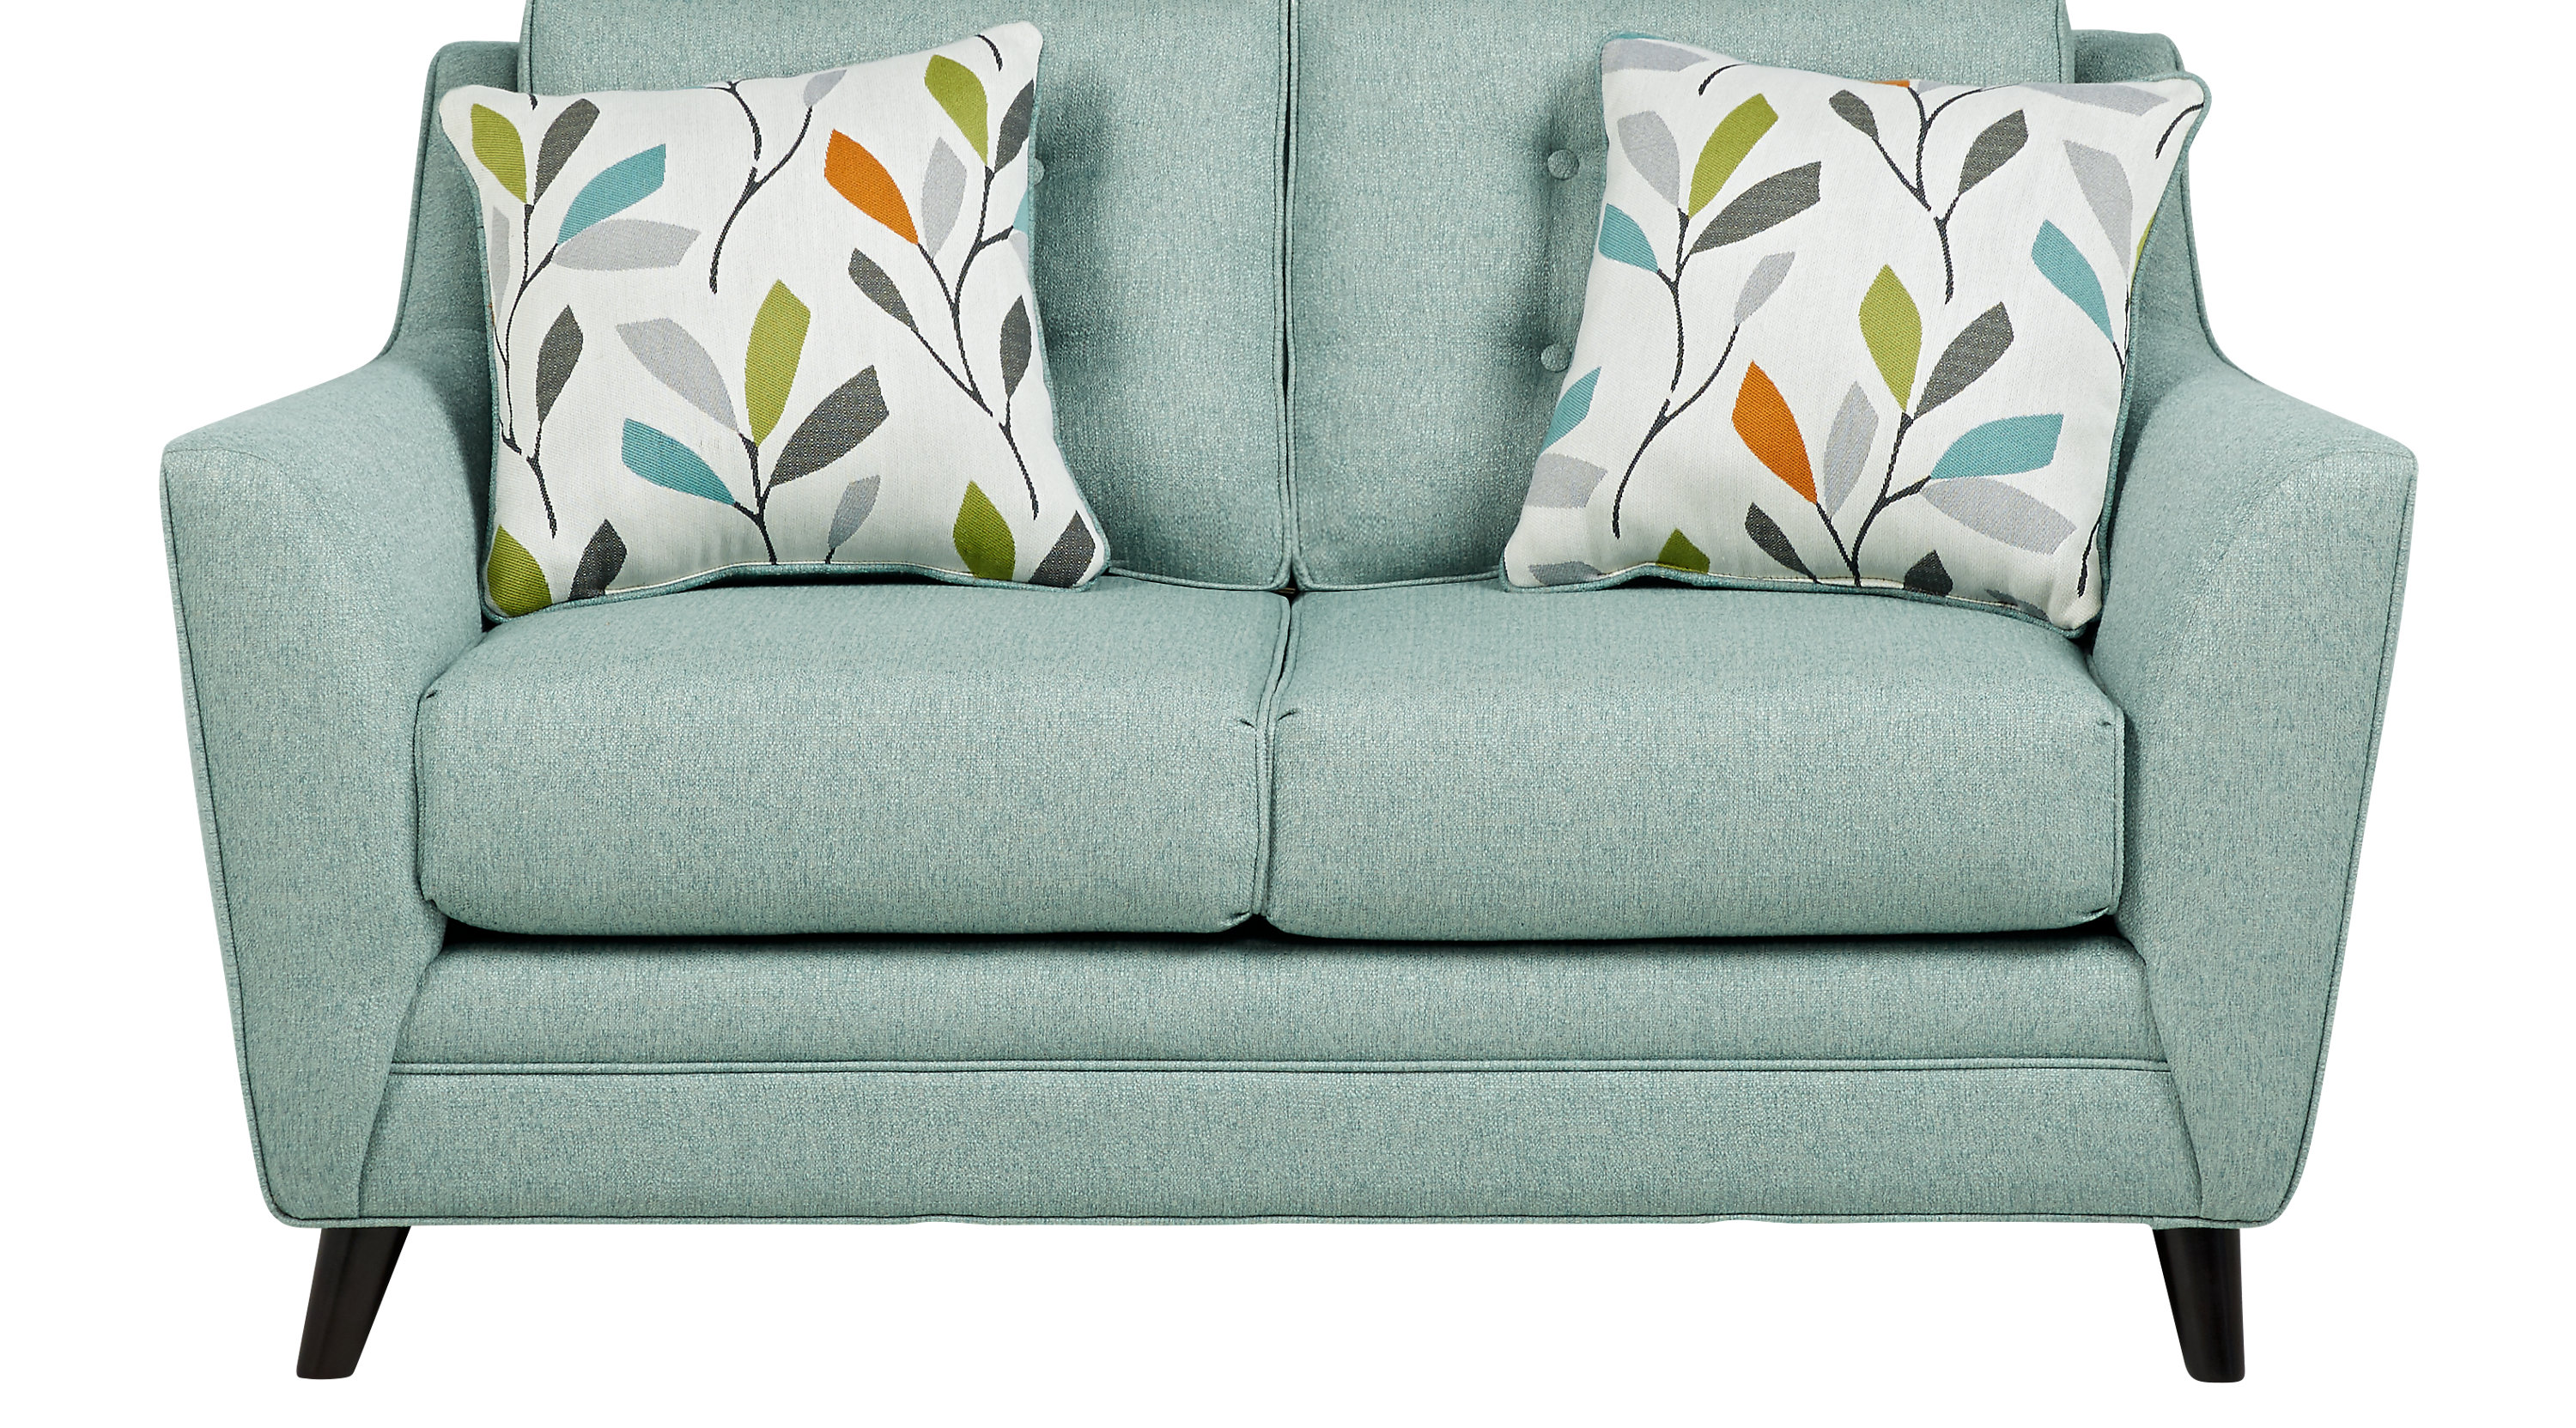 $458.00 - Cobble Heights Teal Loveseat - Classic - Contemporary